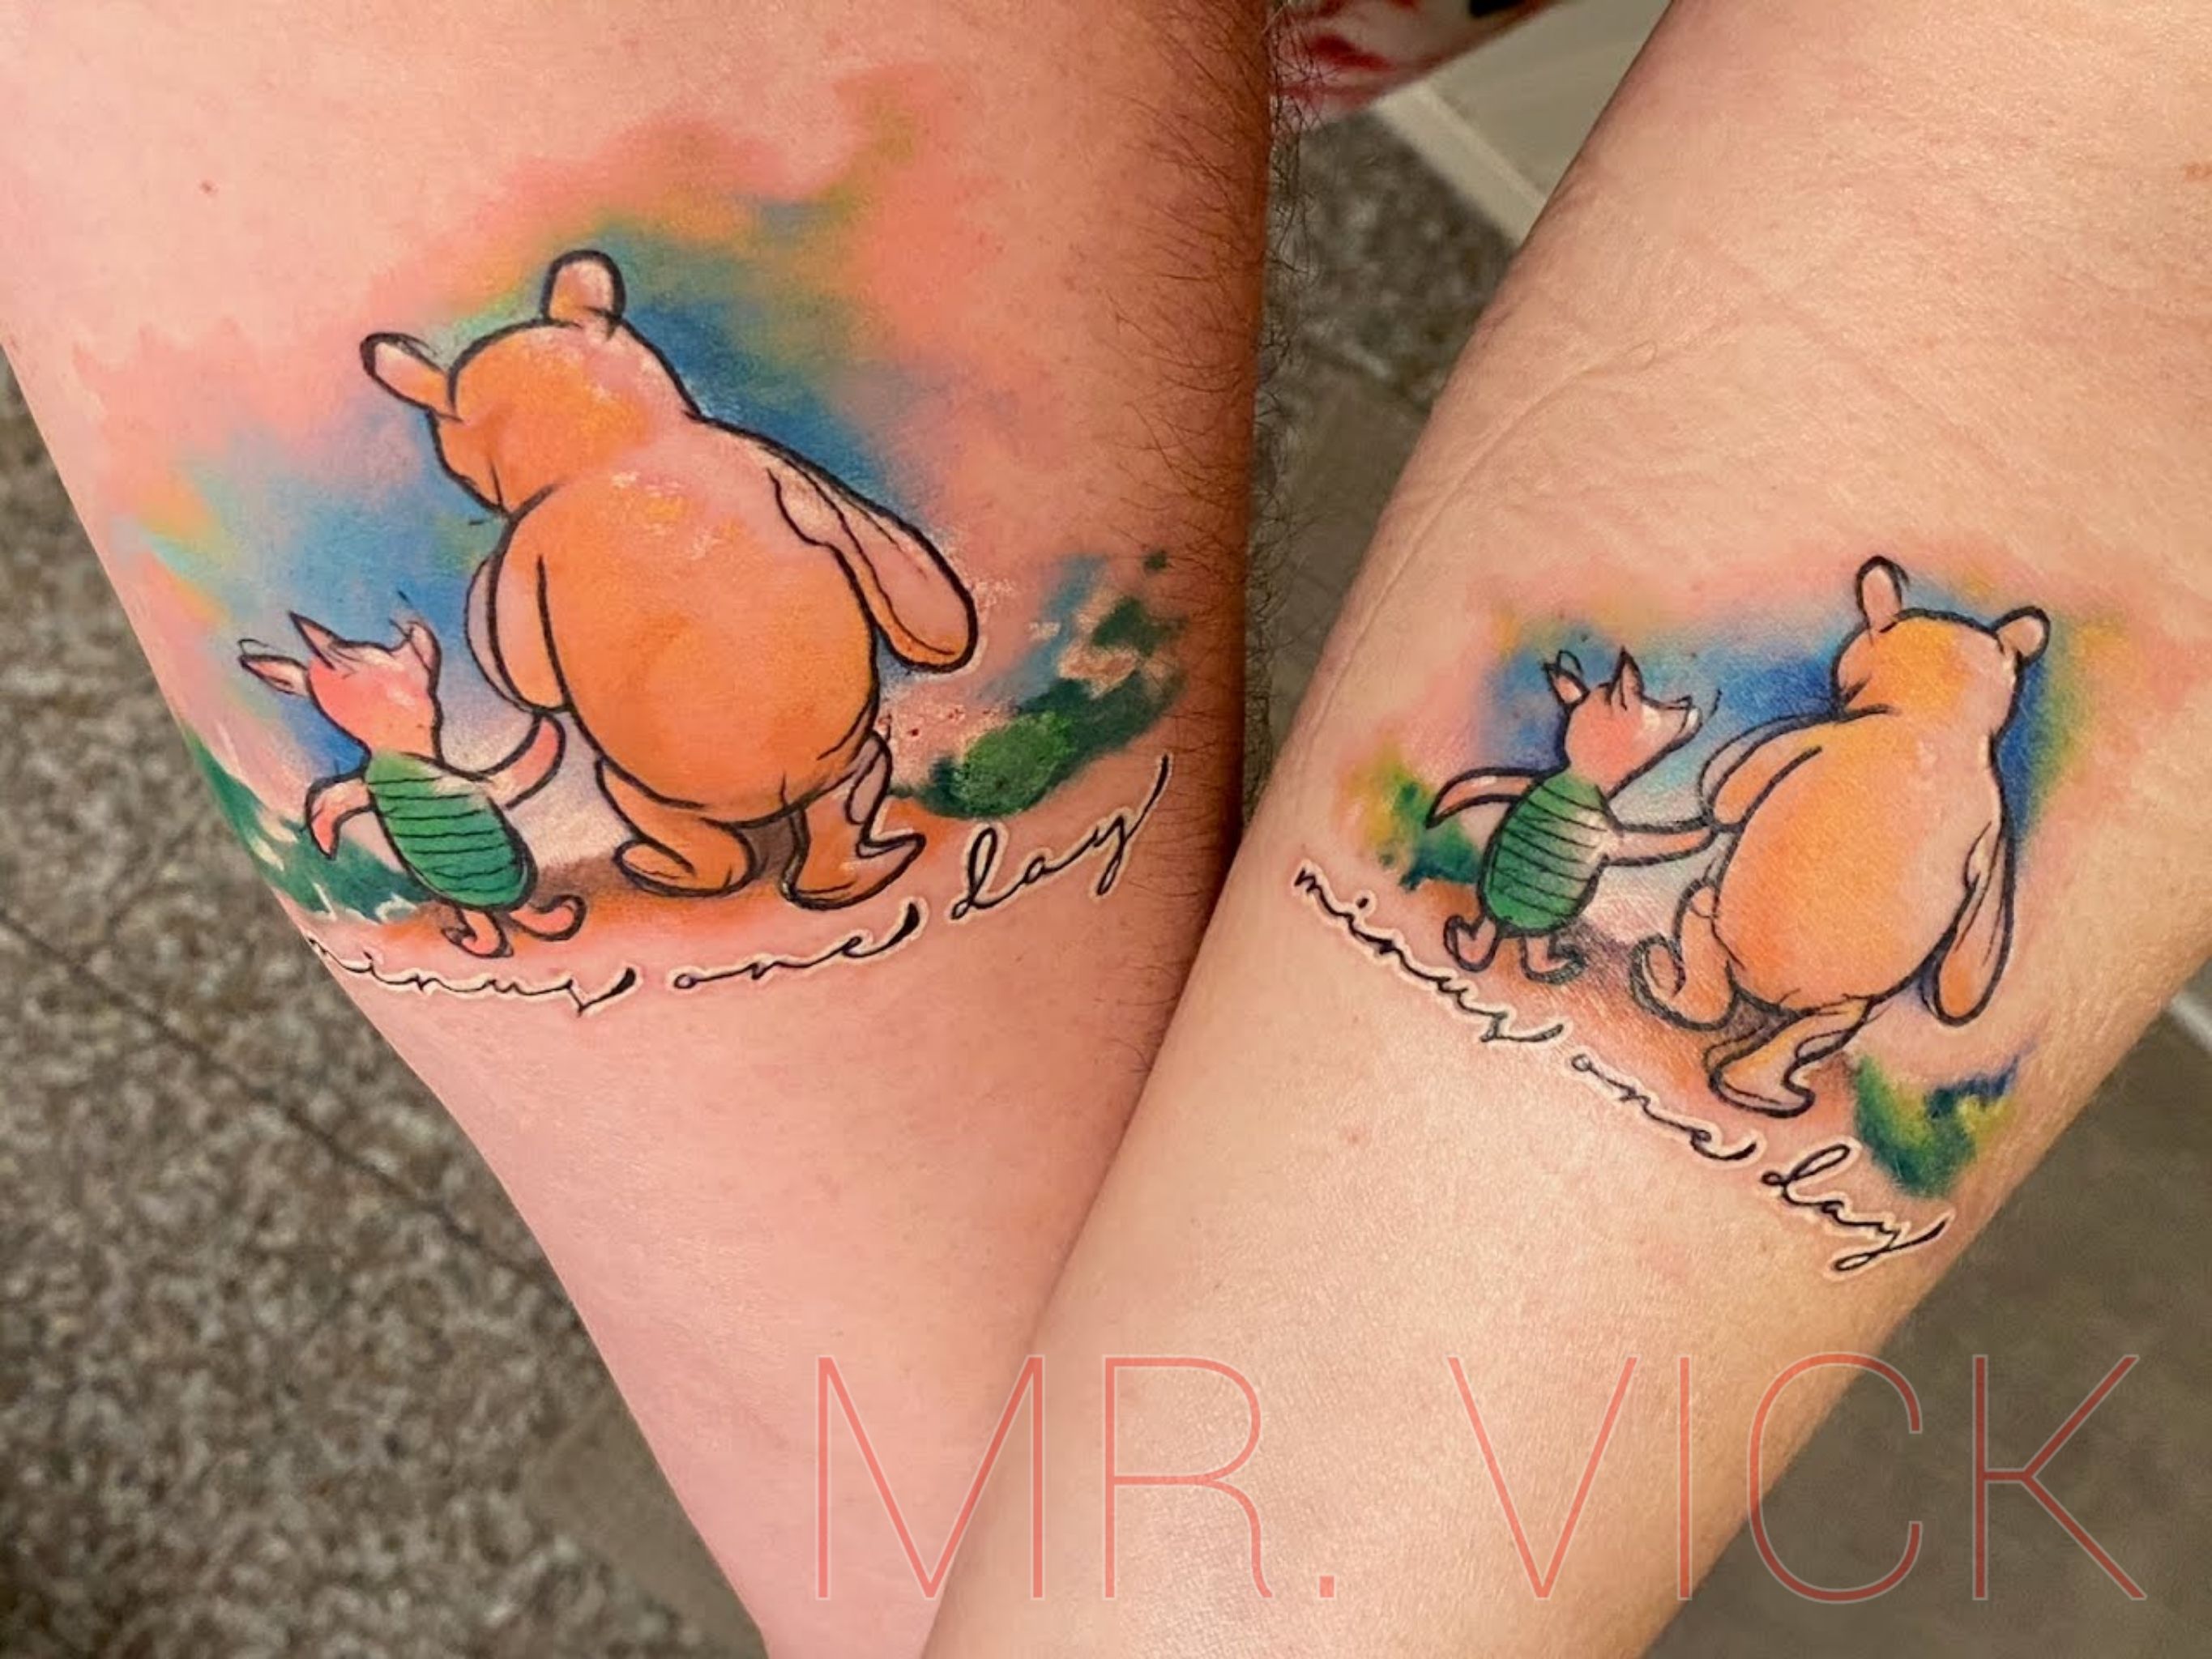 Tattoo uploaded by Mr. Vick • Pooh and Piglet for a couple. • Tattoodo